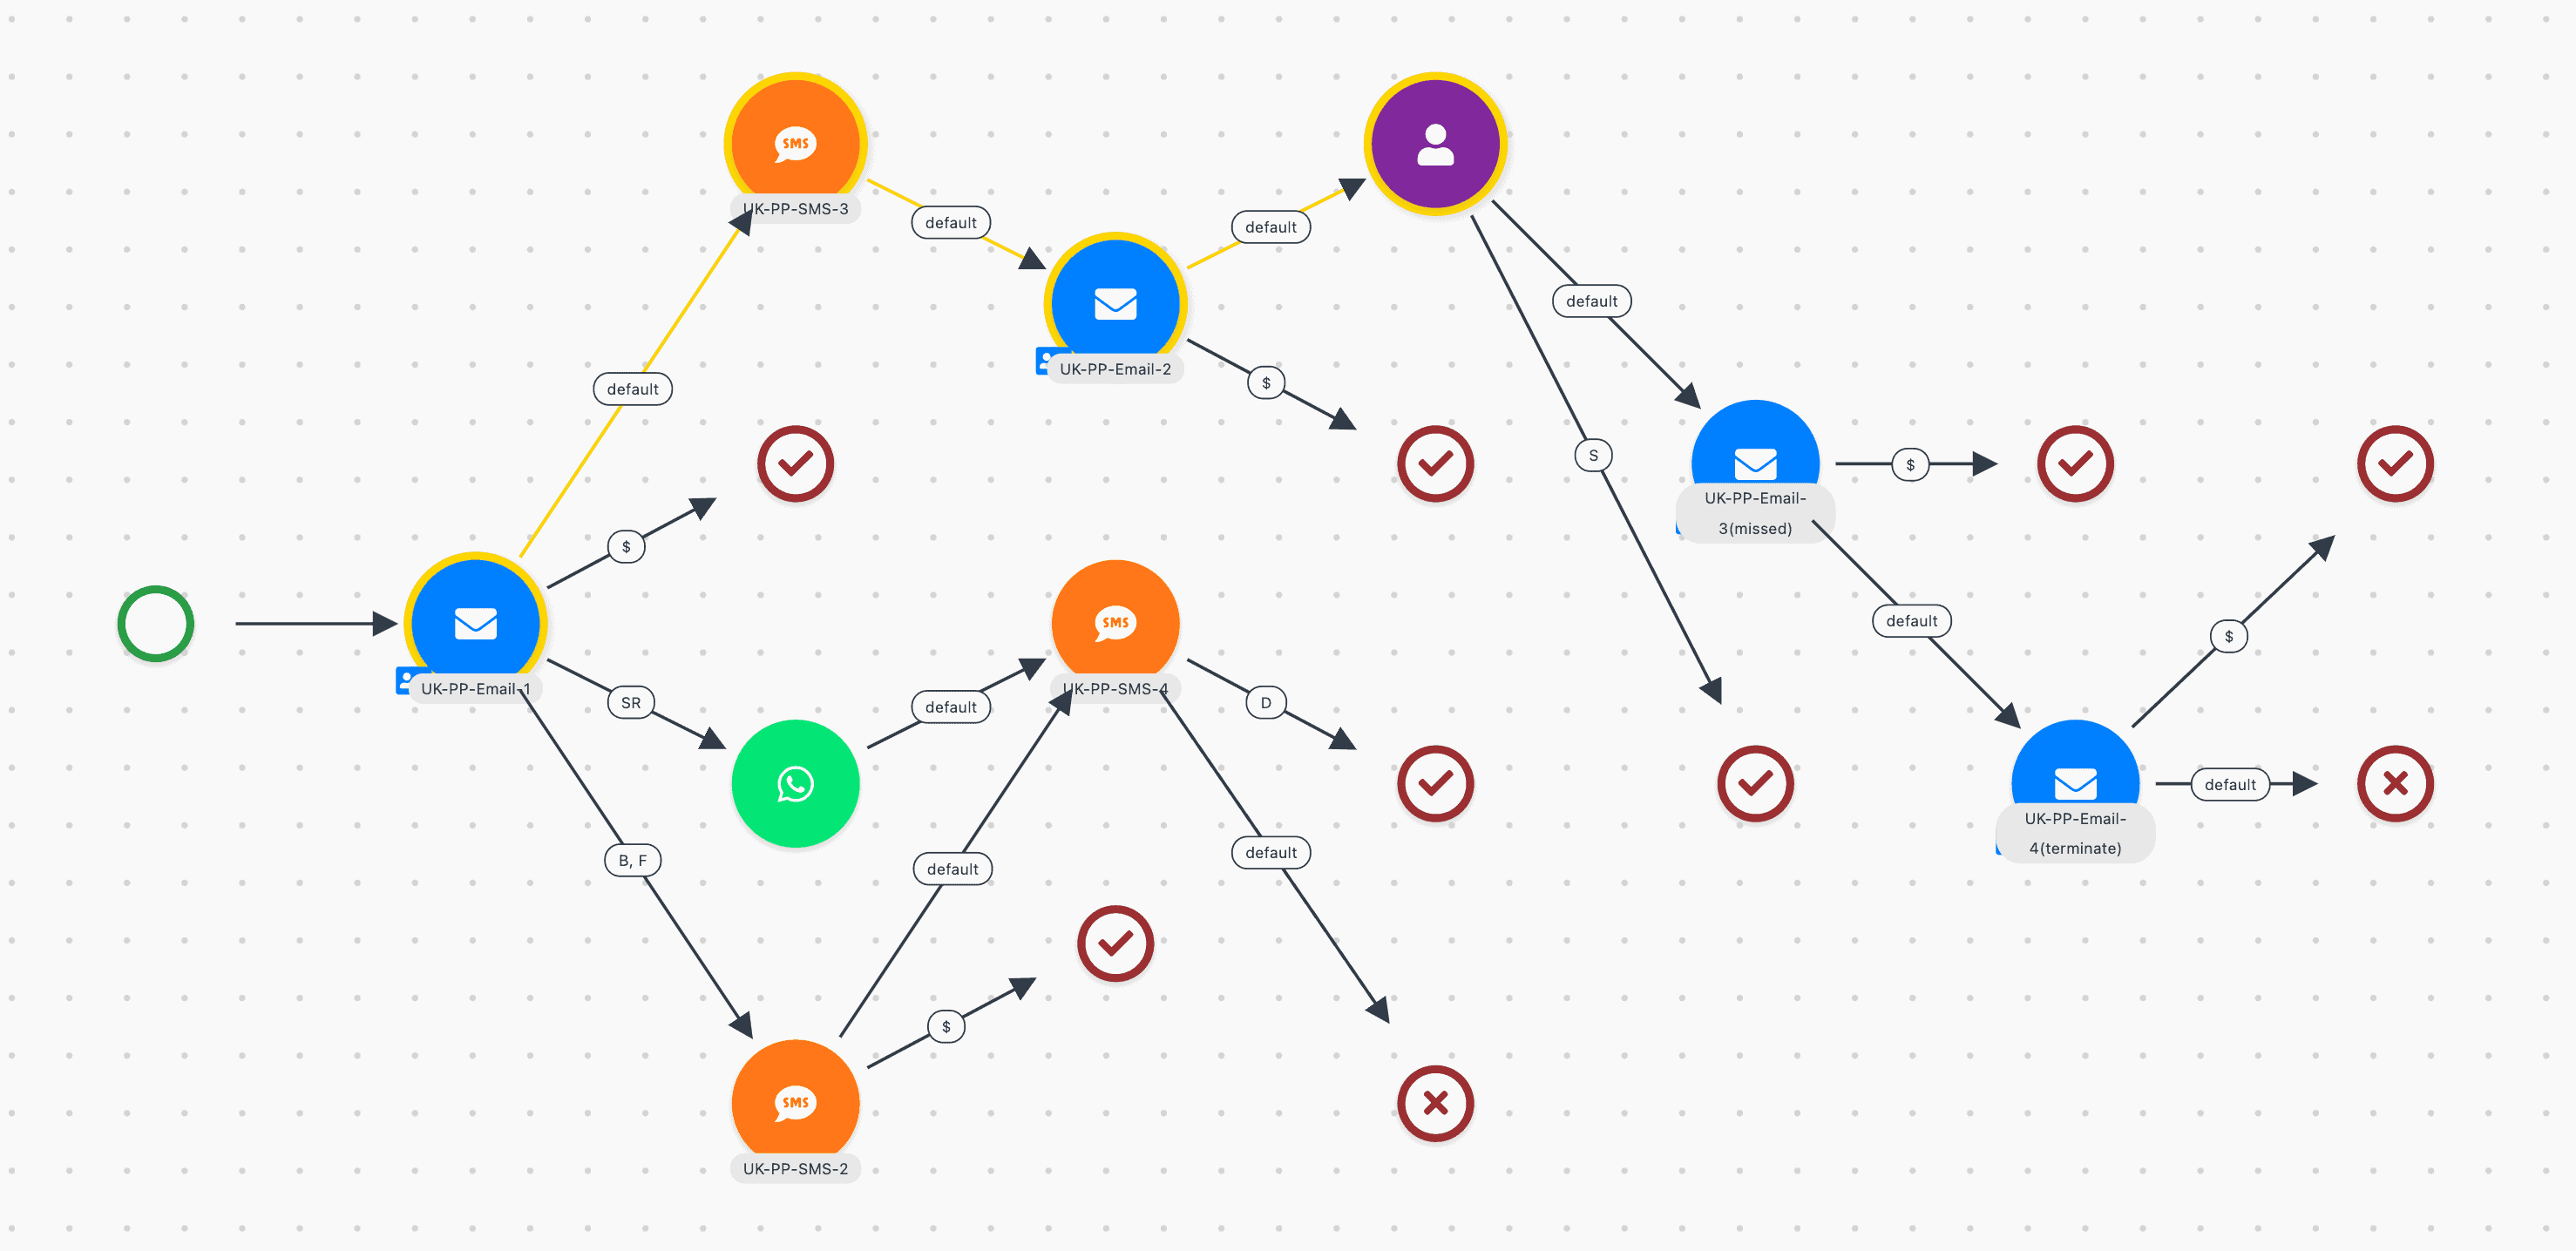 CollectIC workflow tracker